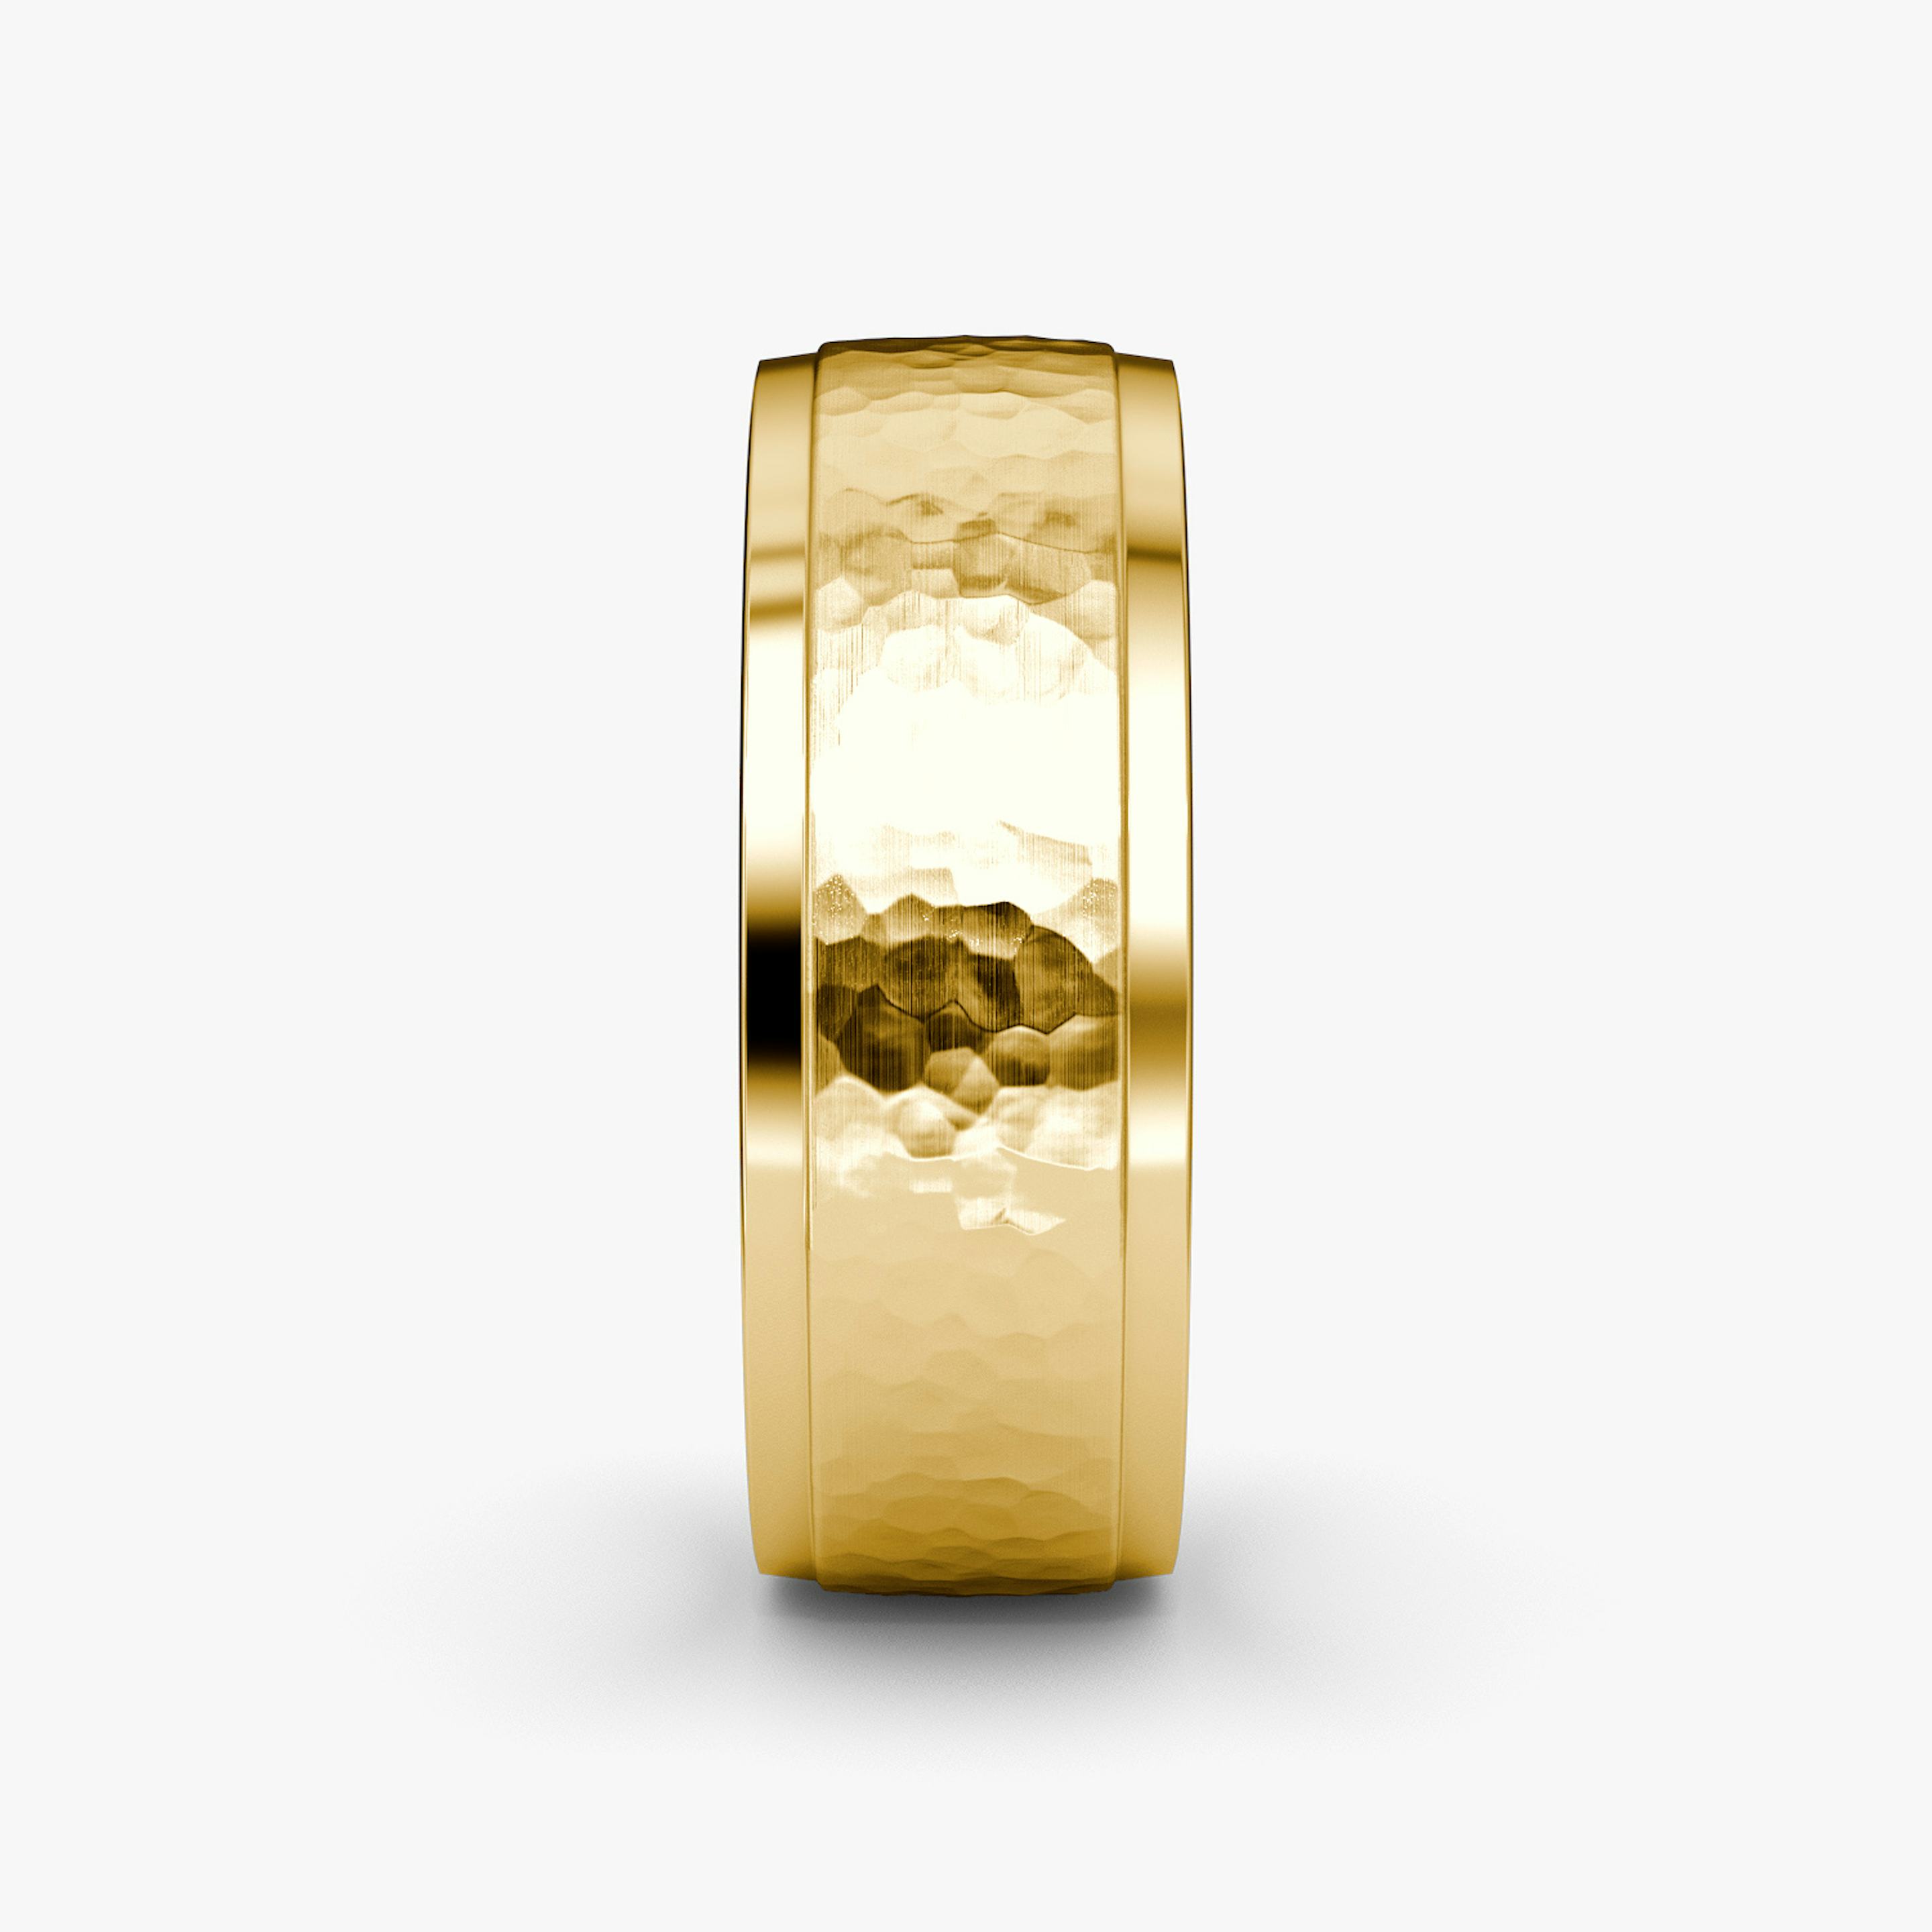 The Hammered Band | 18k | 18k Yellow Gold